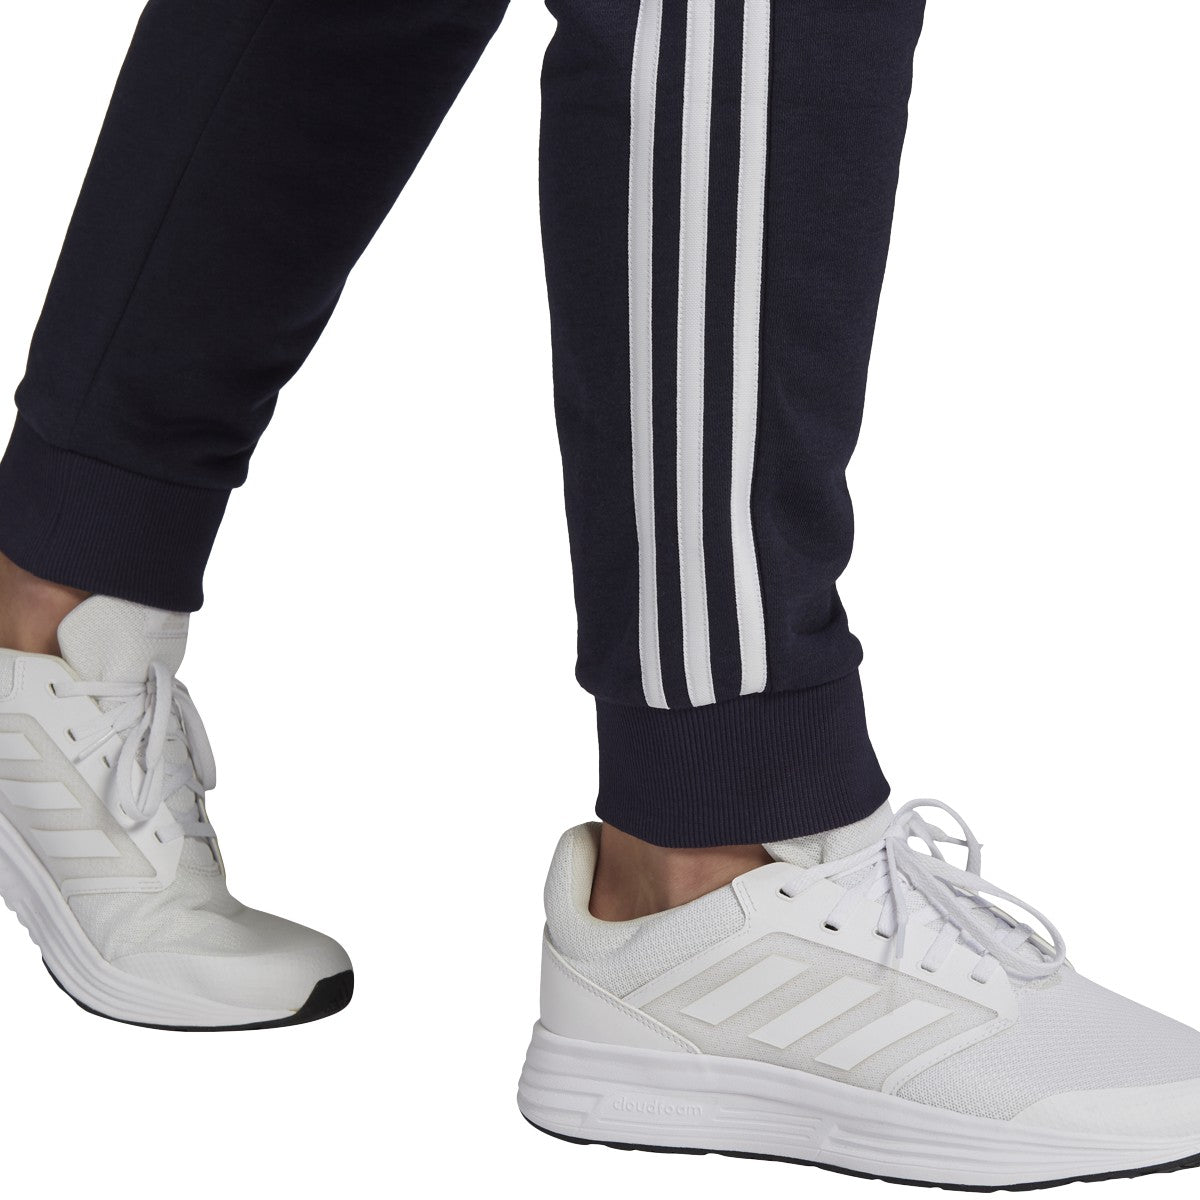 Tapered INK/WHITE Stripes Zone Soccer - LEGEND Cuff adidas GK88 3 Pants Essentials –